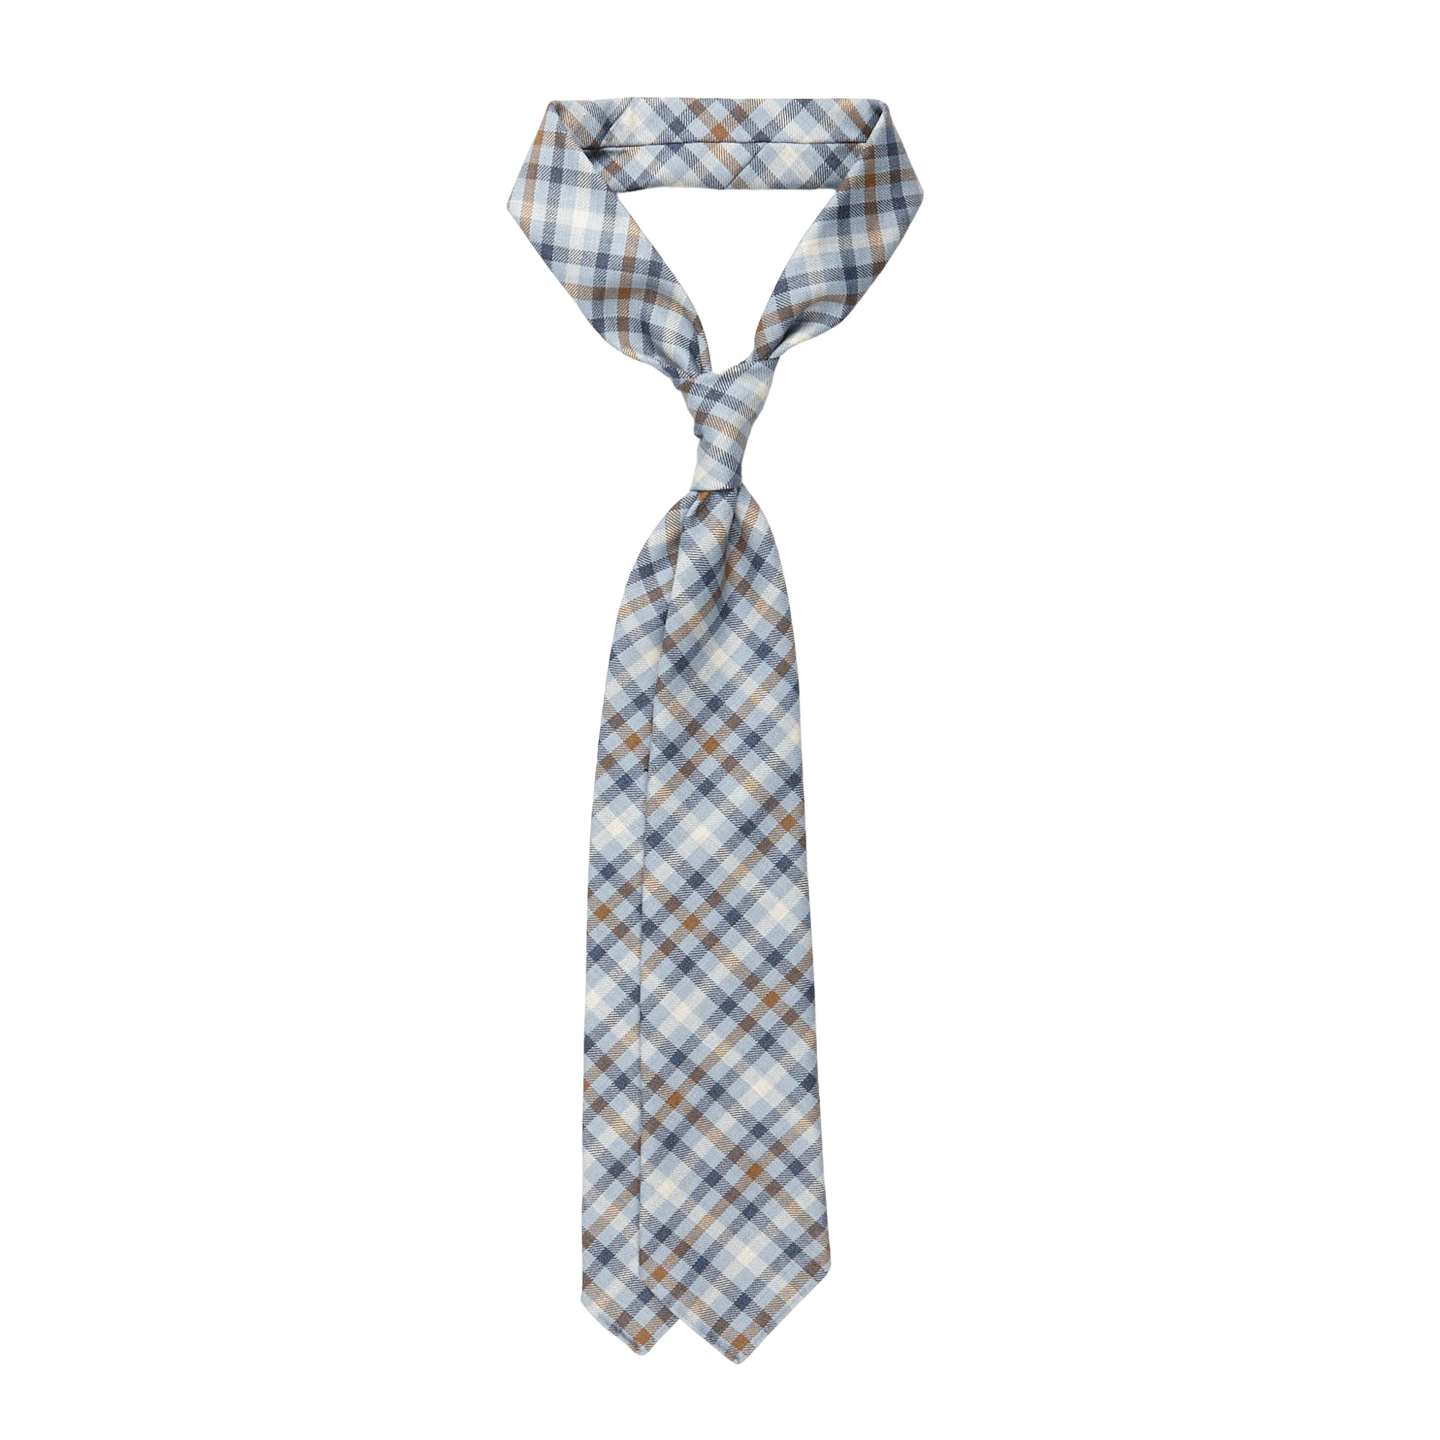 Dreaming of Monday Light Blue Gunclub Checked 7-Fold Wool Tie Feature